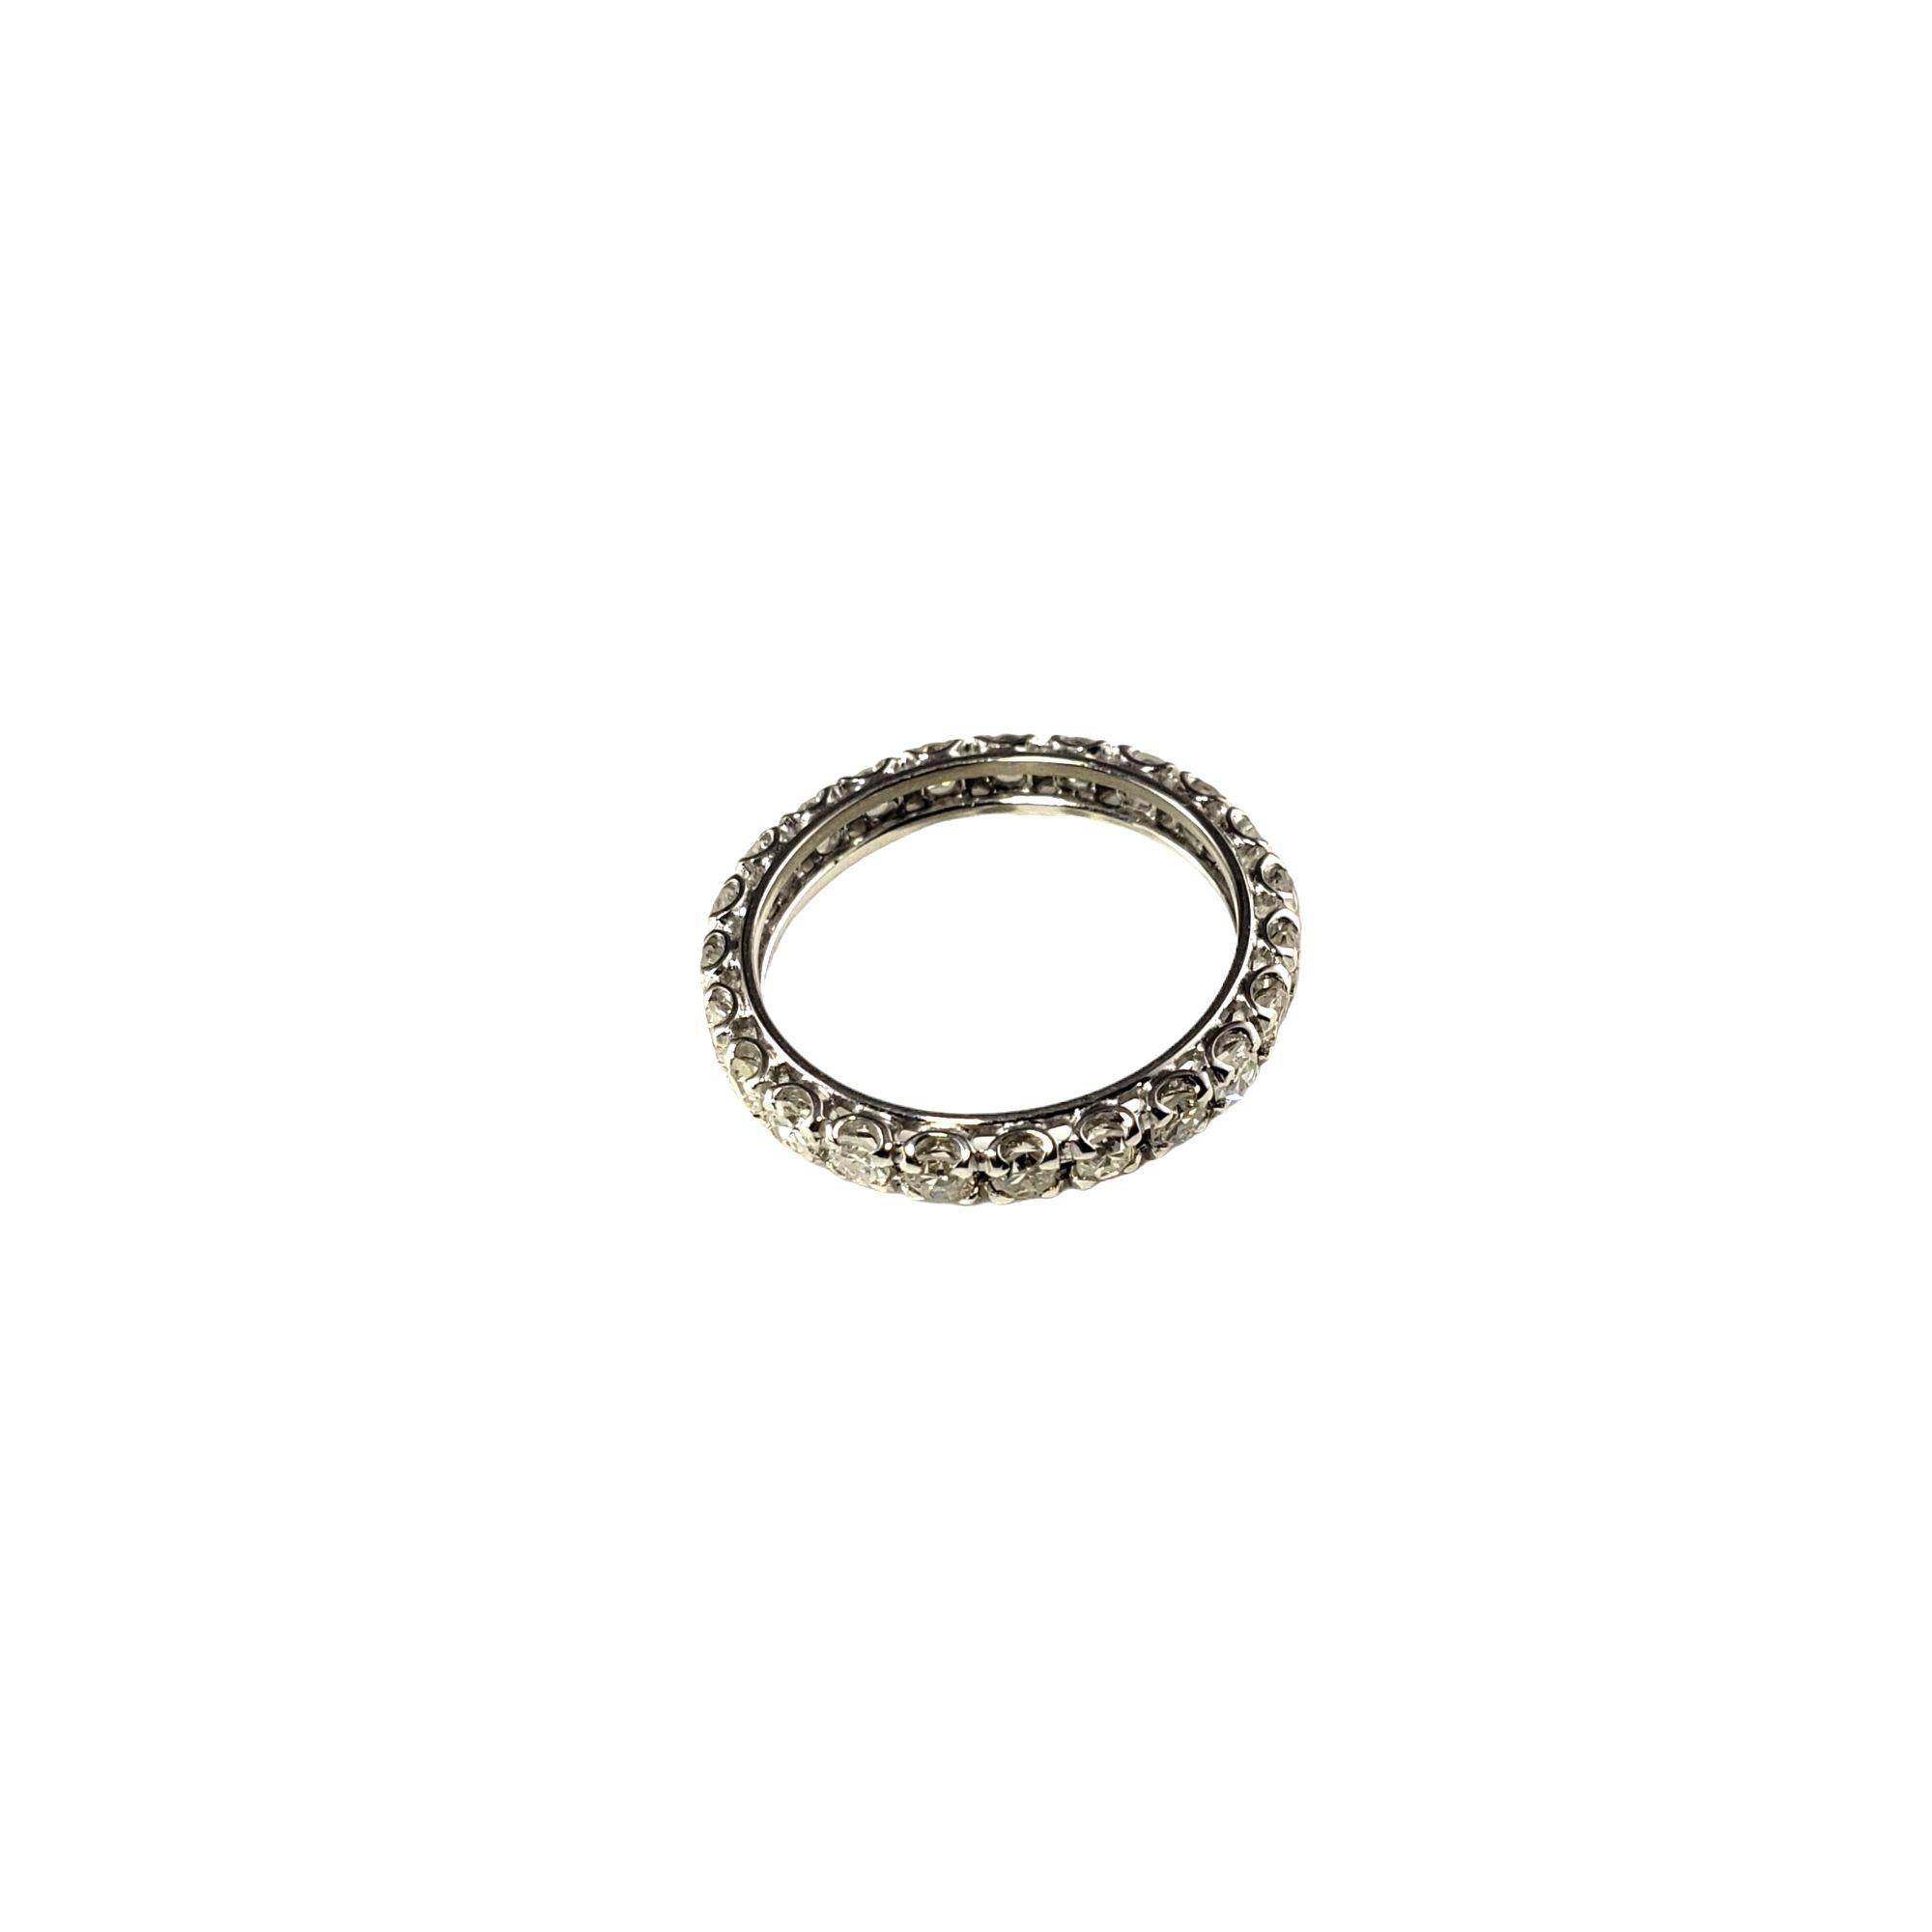 18 Karat White Gold Diamond Eternity Band Ring #14021 In Good Condition For Sale In Washington Depot, CT